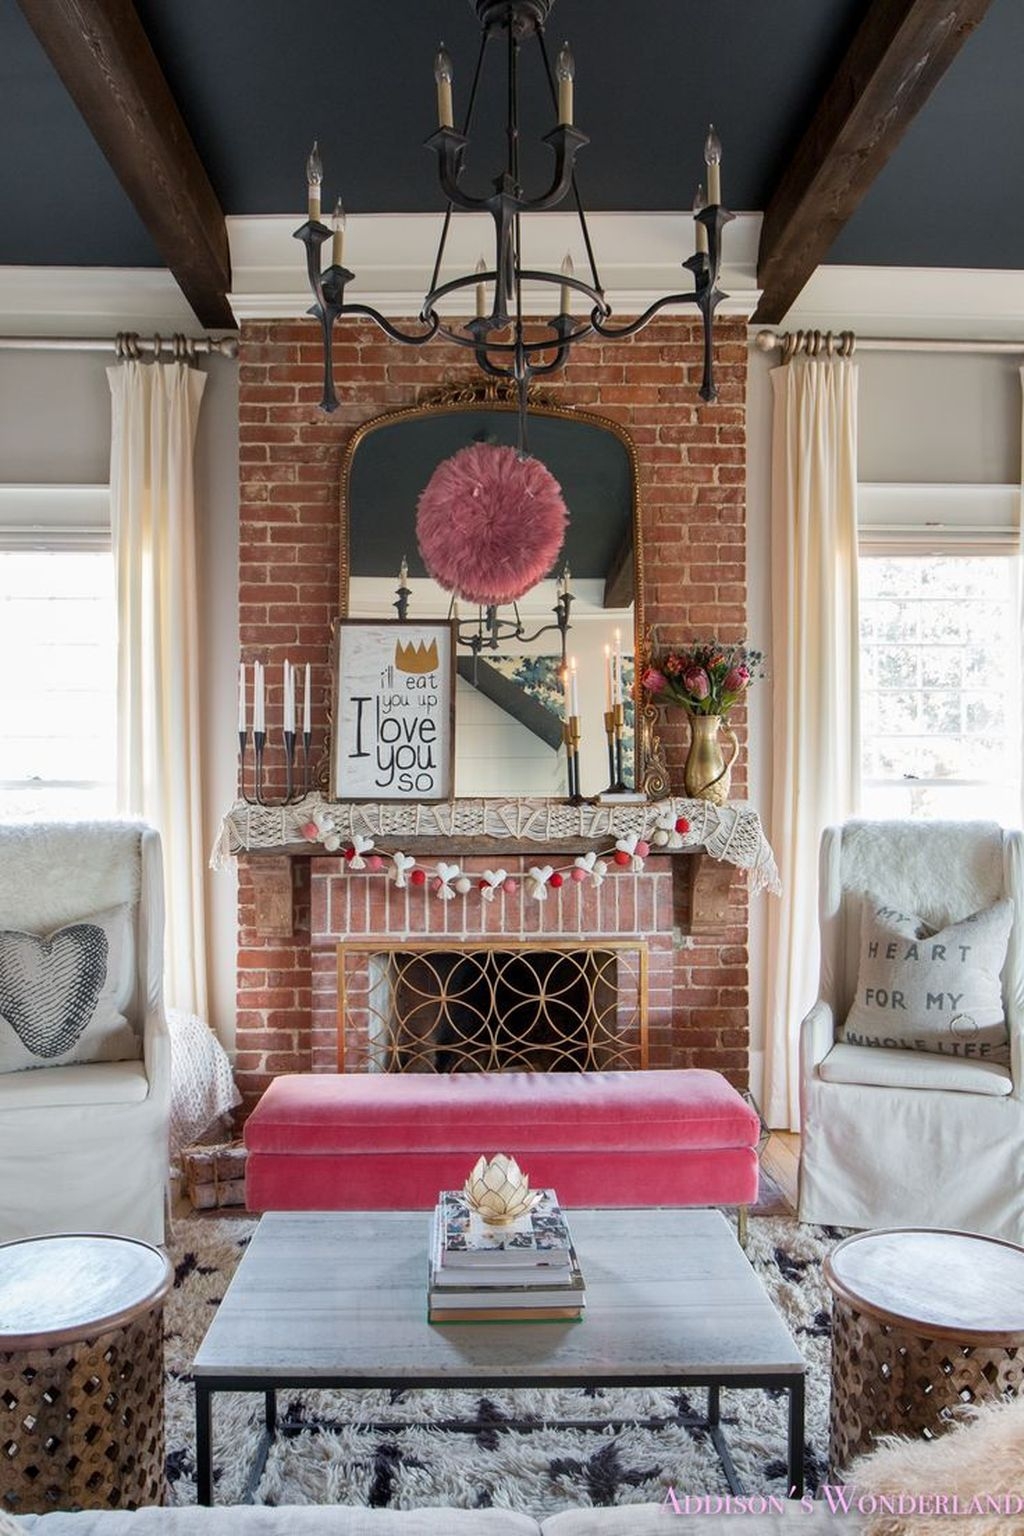 Romantic Valentine Decoration Ideas For Your Living Room 26